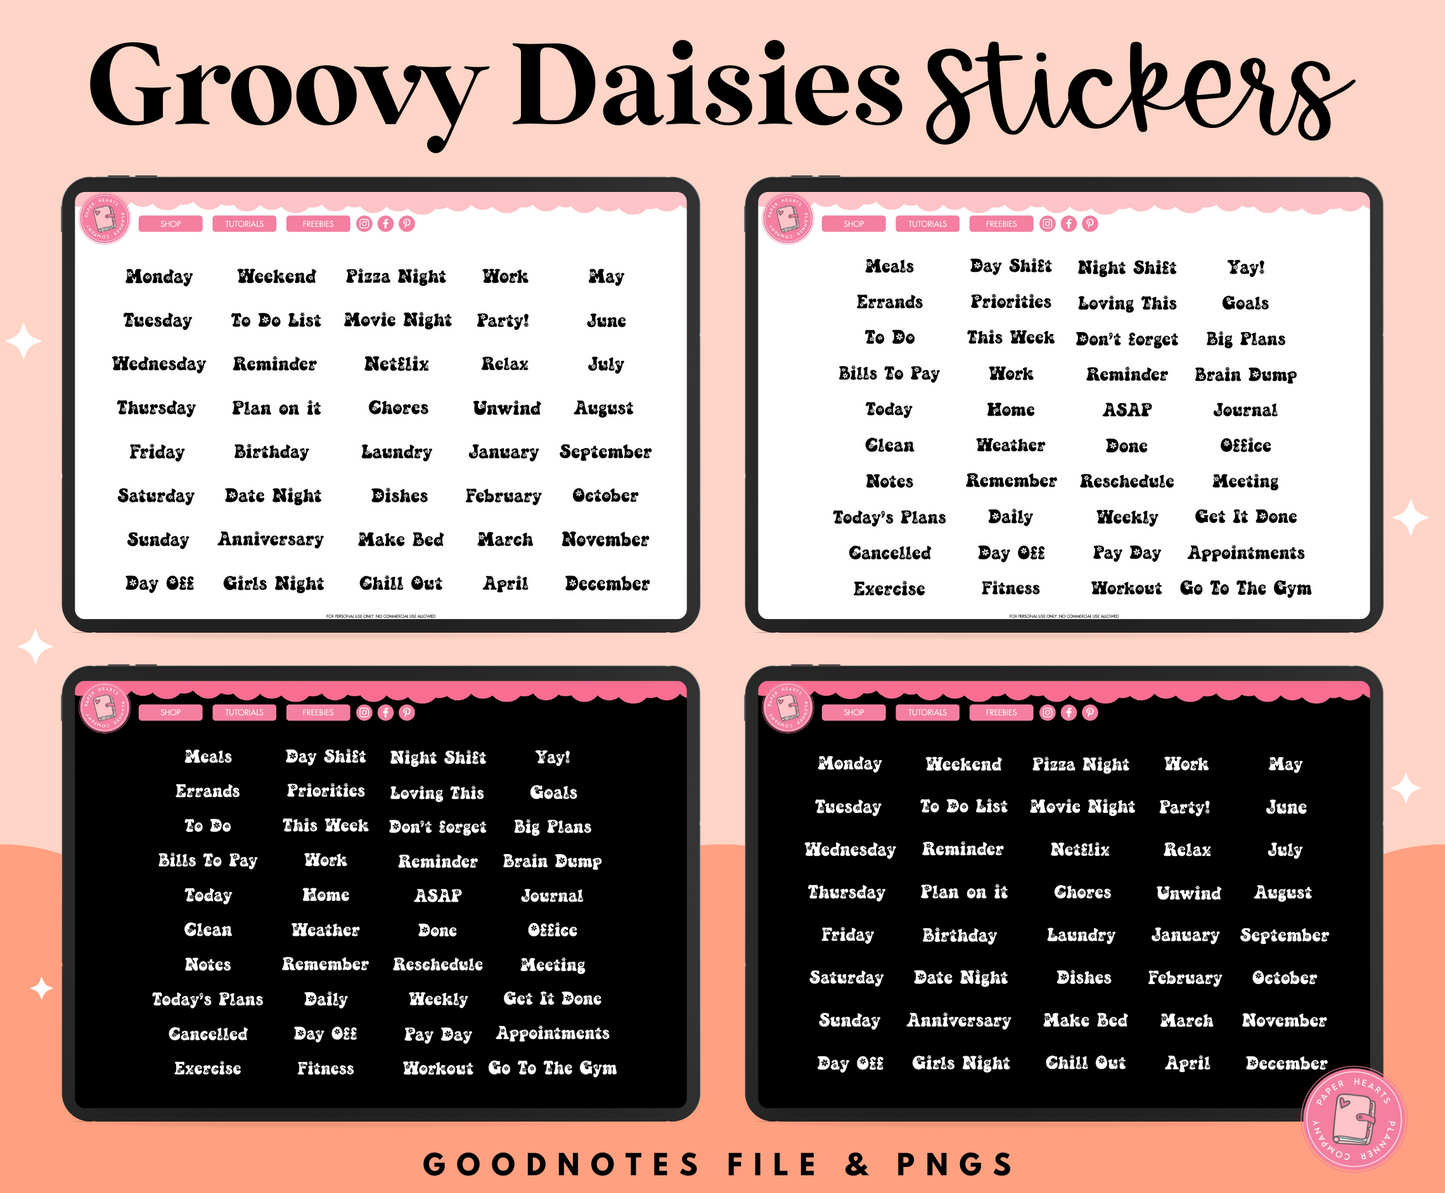 Groovy Daisies Stickers